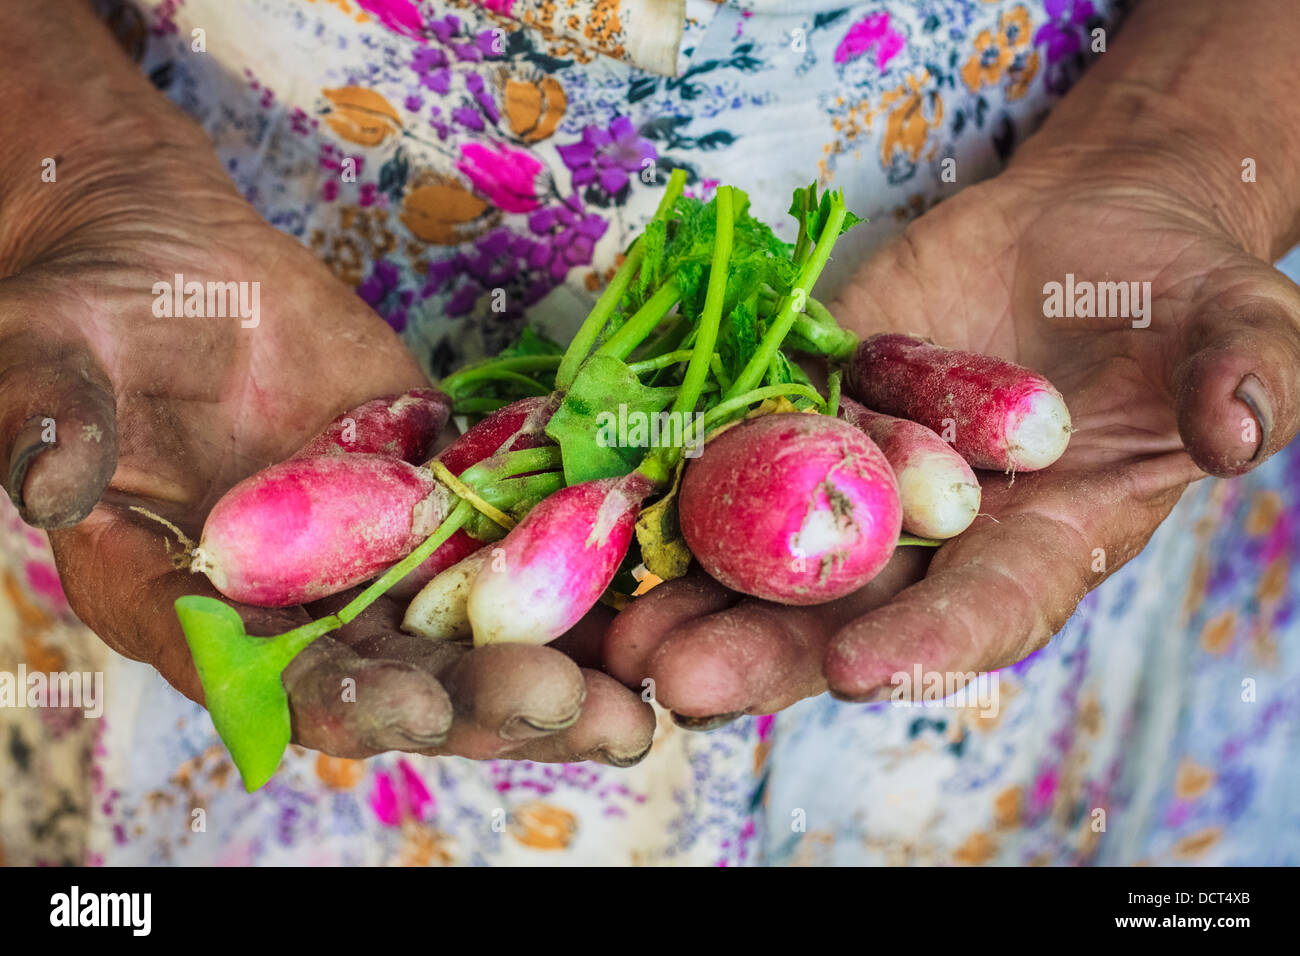 Dirty Hands Holding Freshly Picked Radish From An Organic Garden. Stock Photo